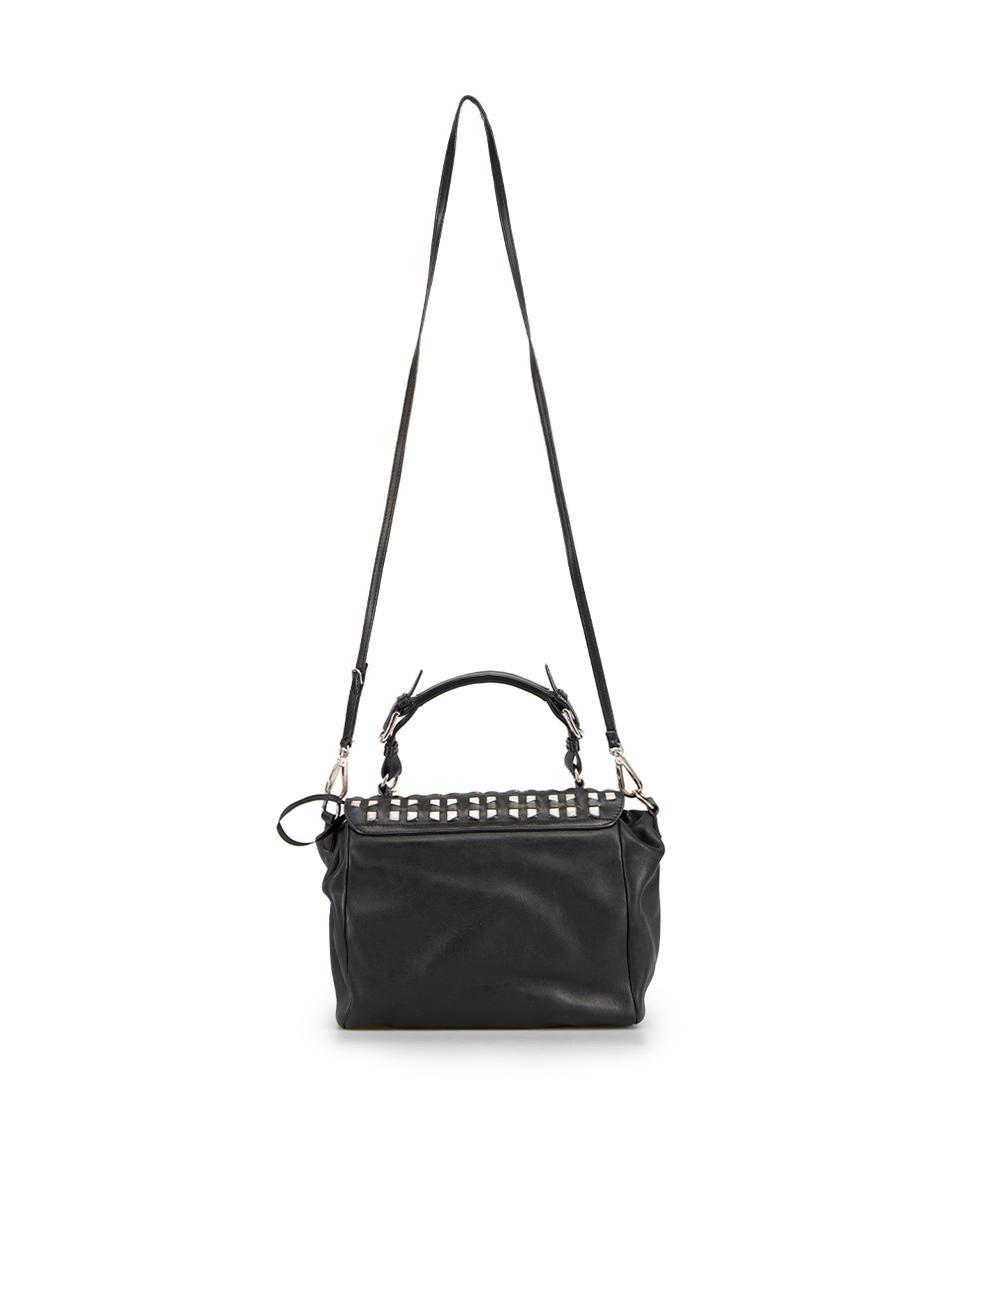 Marni Black Leather Woven Top Handle Bag In Good Condition In London, GB